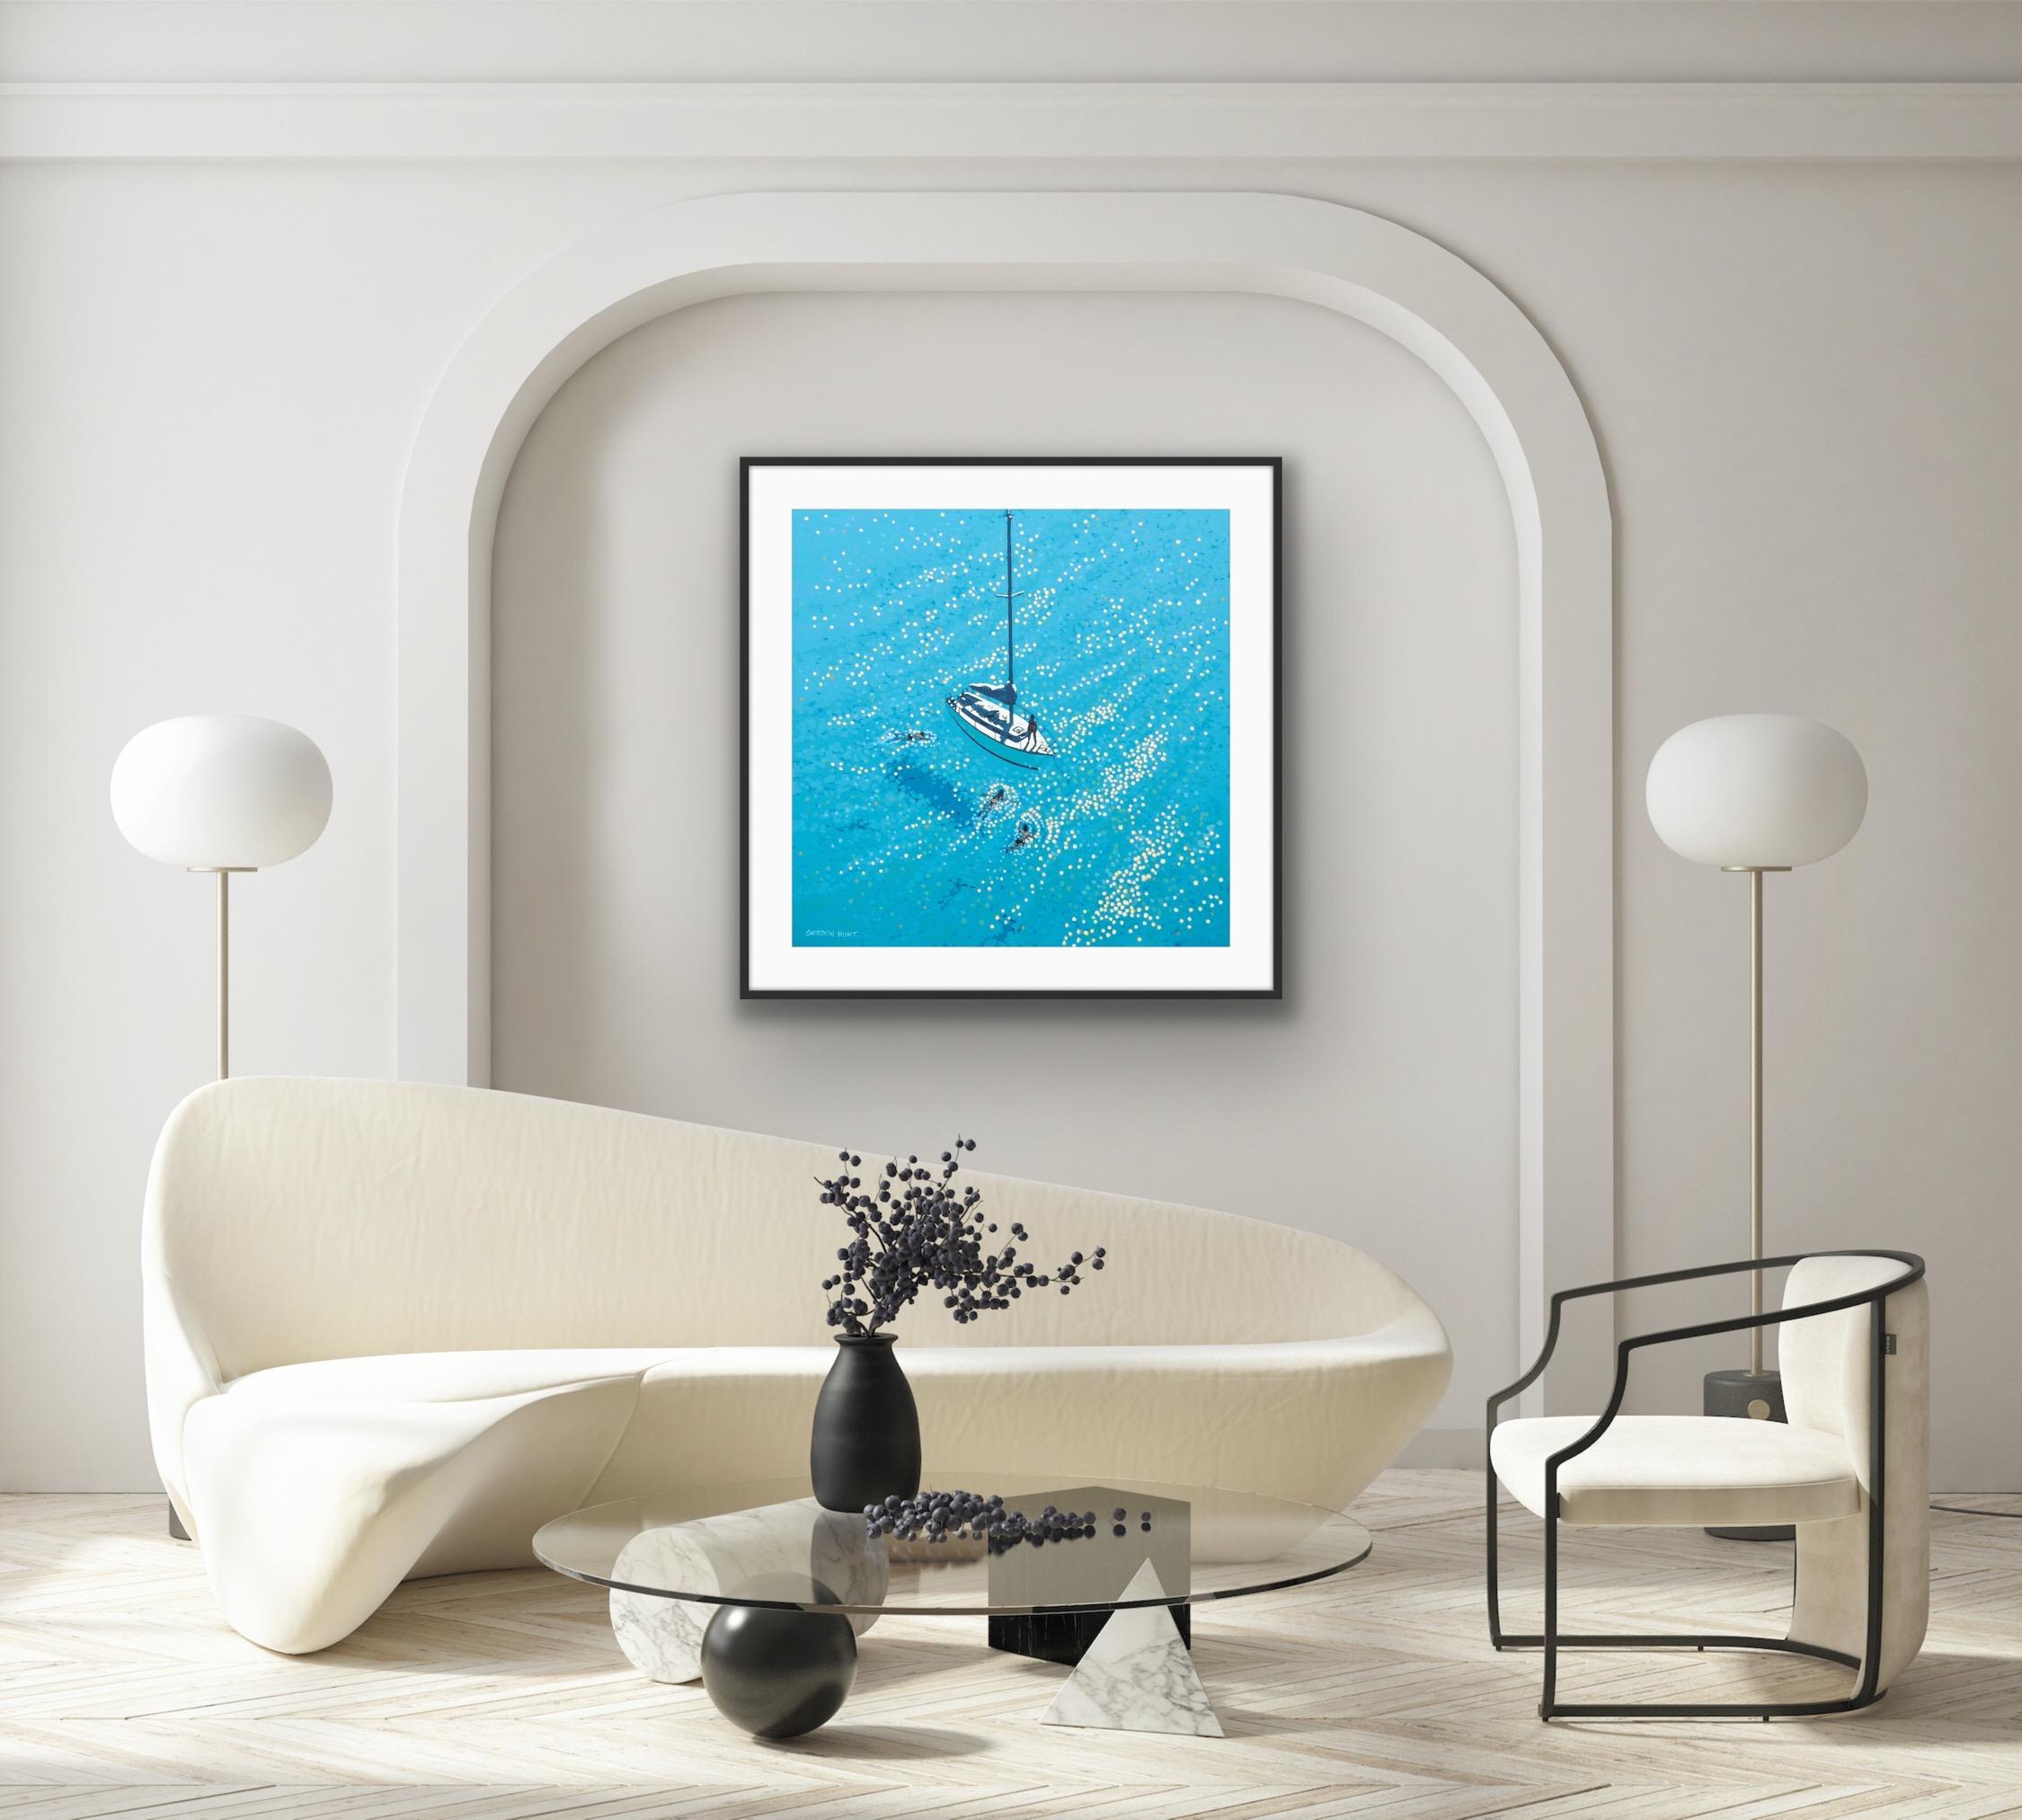 Swim Stop – Large print by Gordon Hunt [2020]

Image Size: H:60 cm x W:60 cm
Complete Size of Sheet/ Unframed Work: H:70 cm x W:70 cm x D:.1cm

This is the only size remaining of this print!
 
'Swim stop' is a limited edition print by Gordon Hunt,